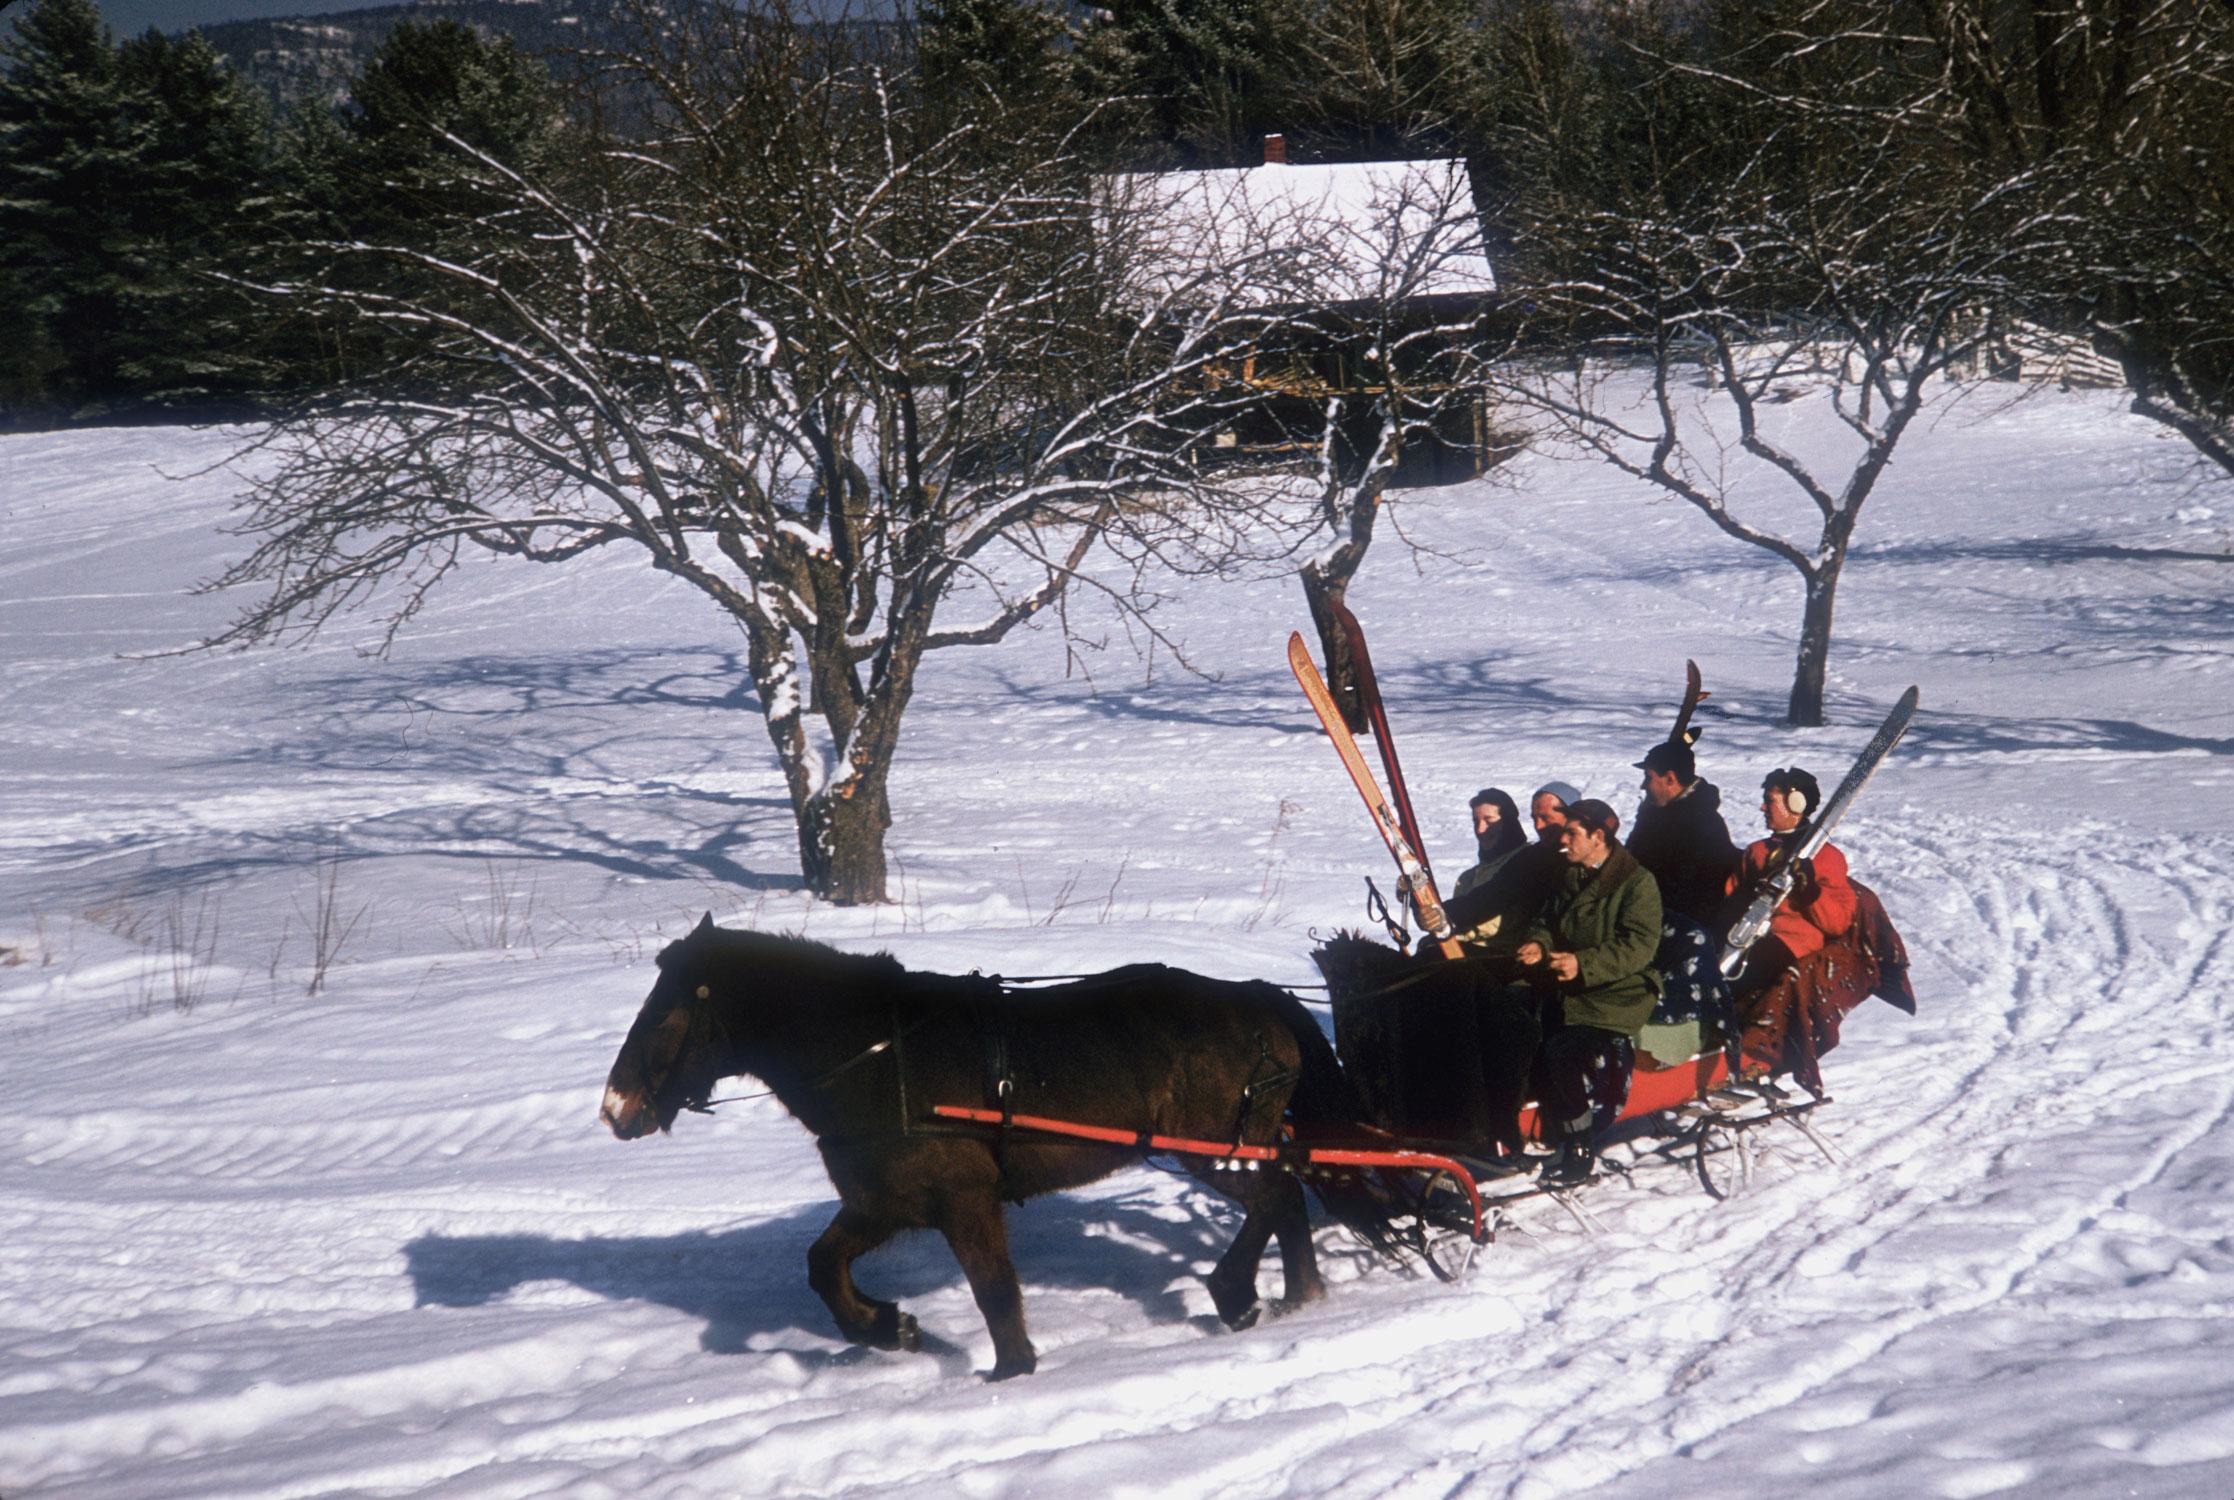 Slim Aarons
Skiers At Sugarbush
1955 (printed later)
C print 
Estate stamped and numbered edition of 150 
with Certificate of authenticity

1955, An open sleigh taking skiers to Cranmore Mountain, New Hampshire, USA. (Photo by Slim Aarons/Getty